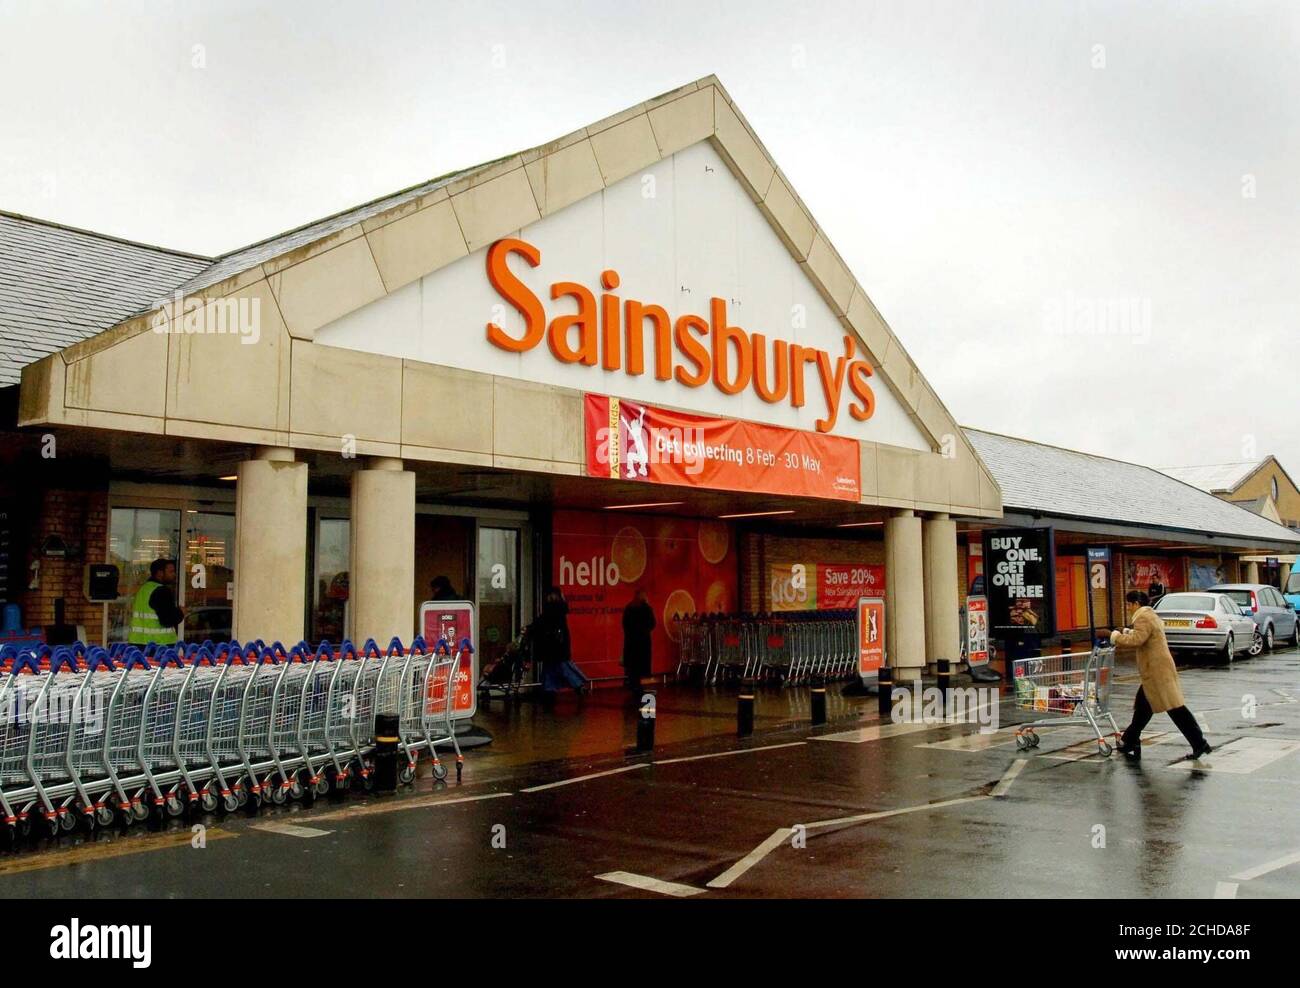 Library Filer Dated 07 03 06 Of The Sainsburys Store At Shires Retail Park Leamington Spa After A Teenager Raped An 11 Year Old At The Store Stock Photo Alamy